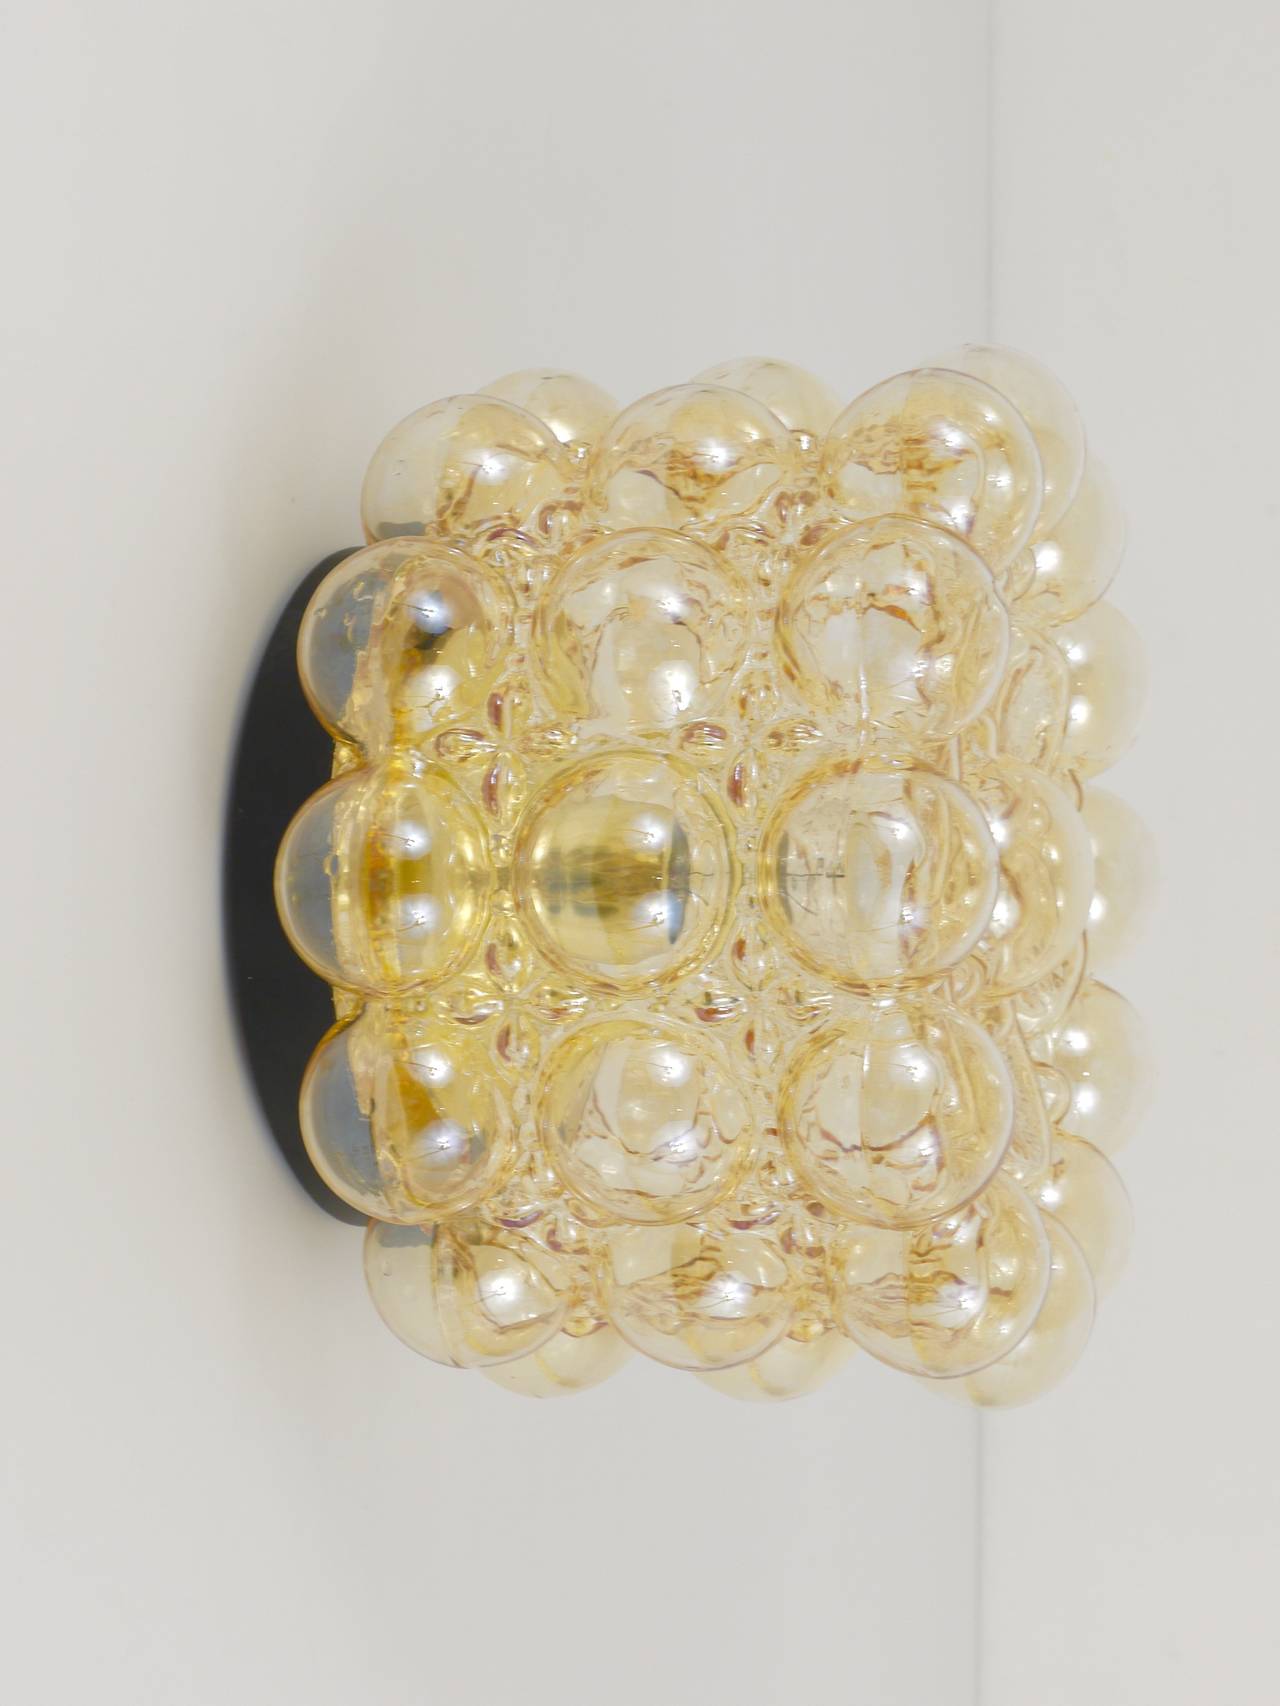 A beautiful bubble glass lamp in very good condition. To use as a flush mount or sconce / wall lamp. Designed by Helena Tynell, executed in the 1960s by Glashutte Limburg, Germany. Bubble glass lampshade in amber with a nice light golden mirroring